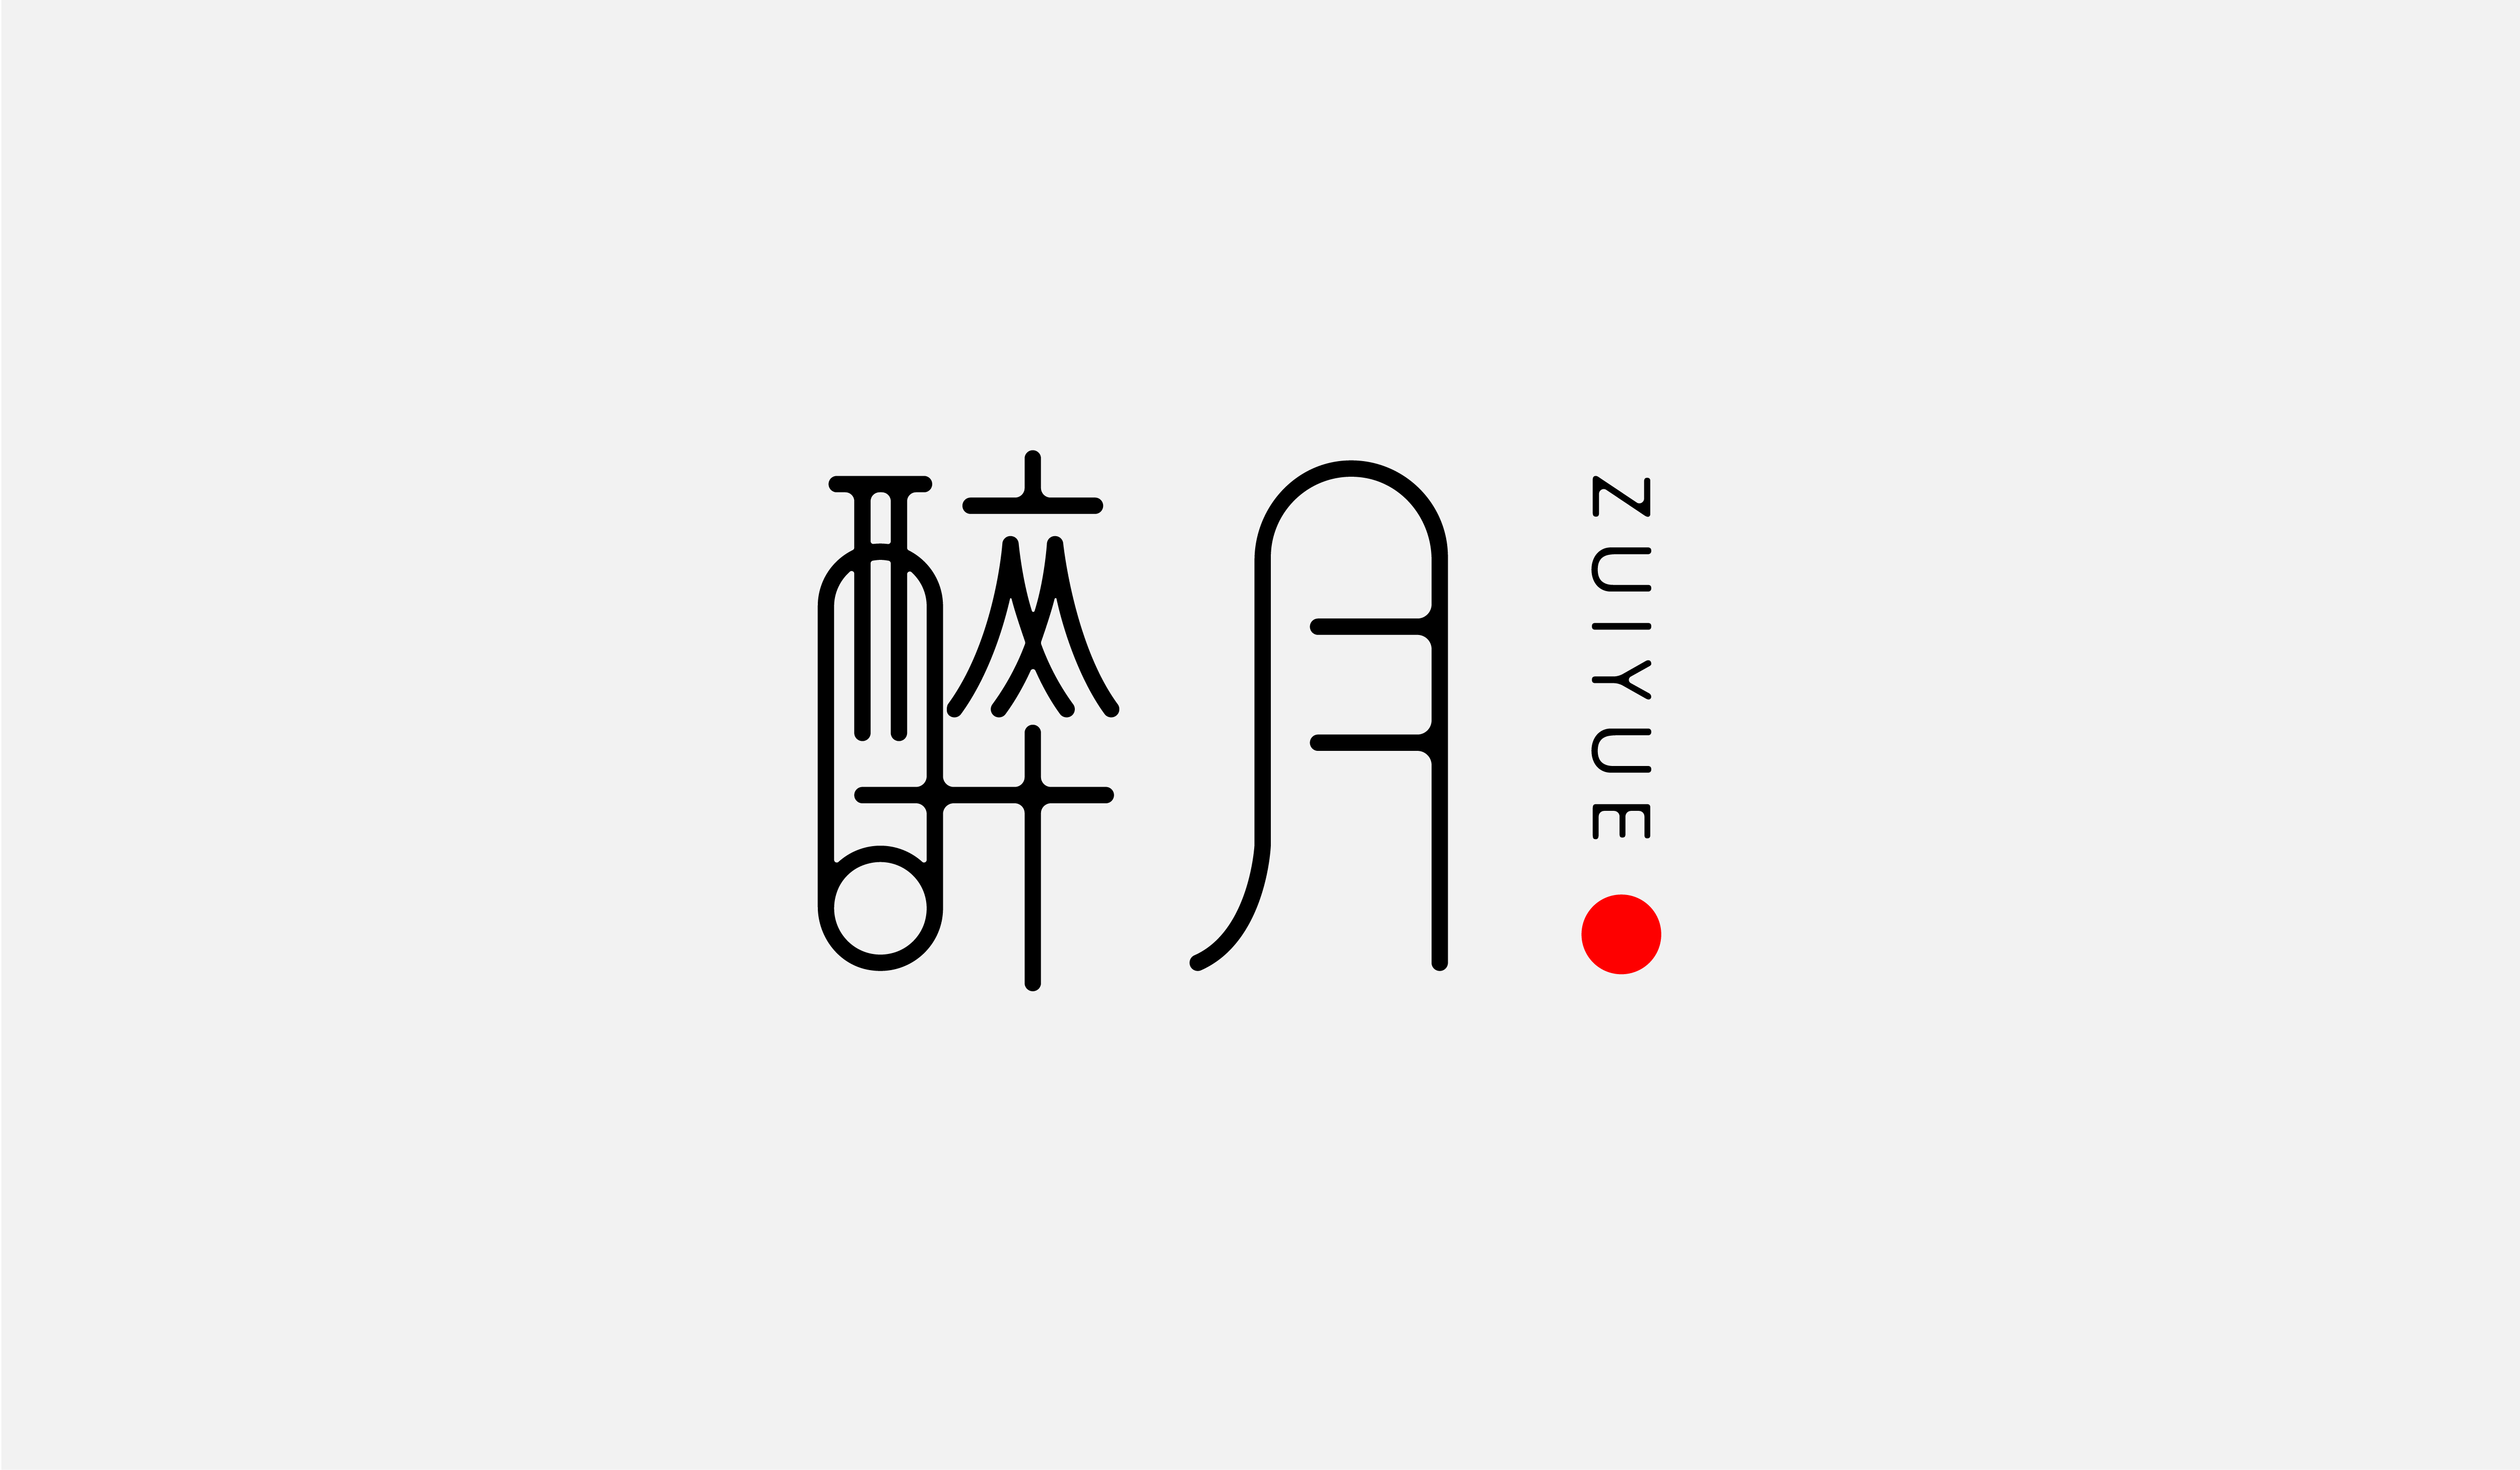 30P Collection of the latest Chinese font design schemes in 2021 #.91